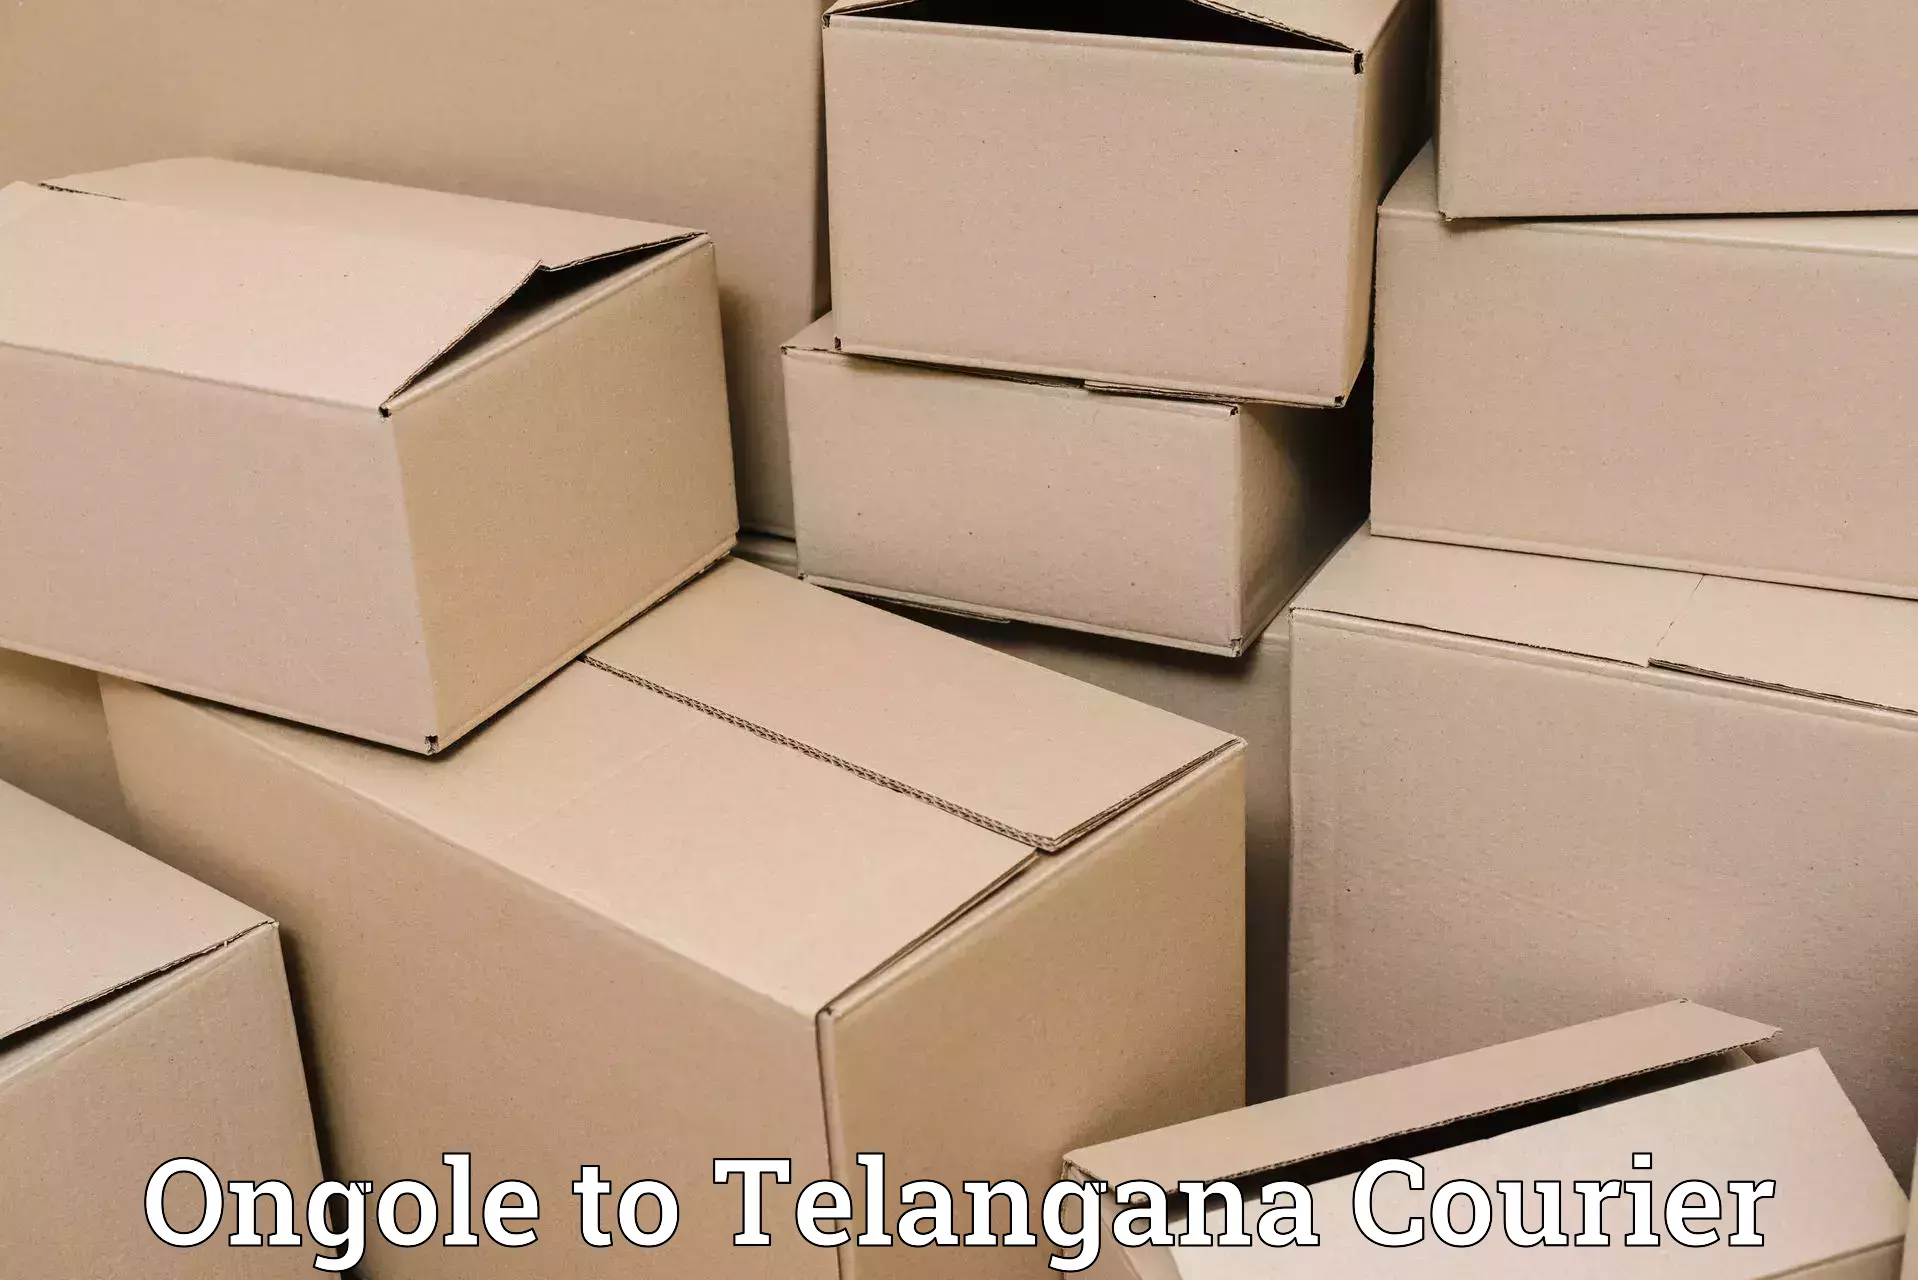 Round-the-clock parcel delivery Ongole to Choutuppal